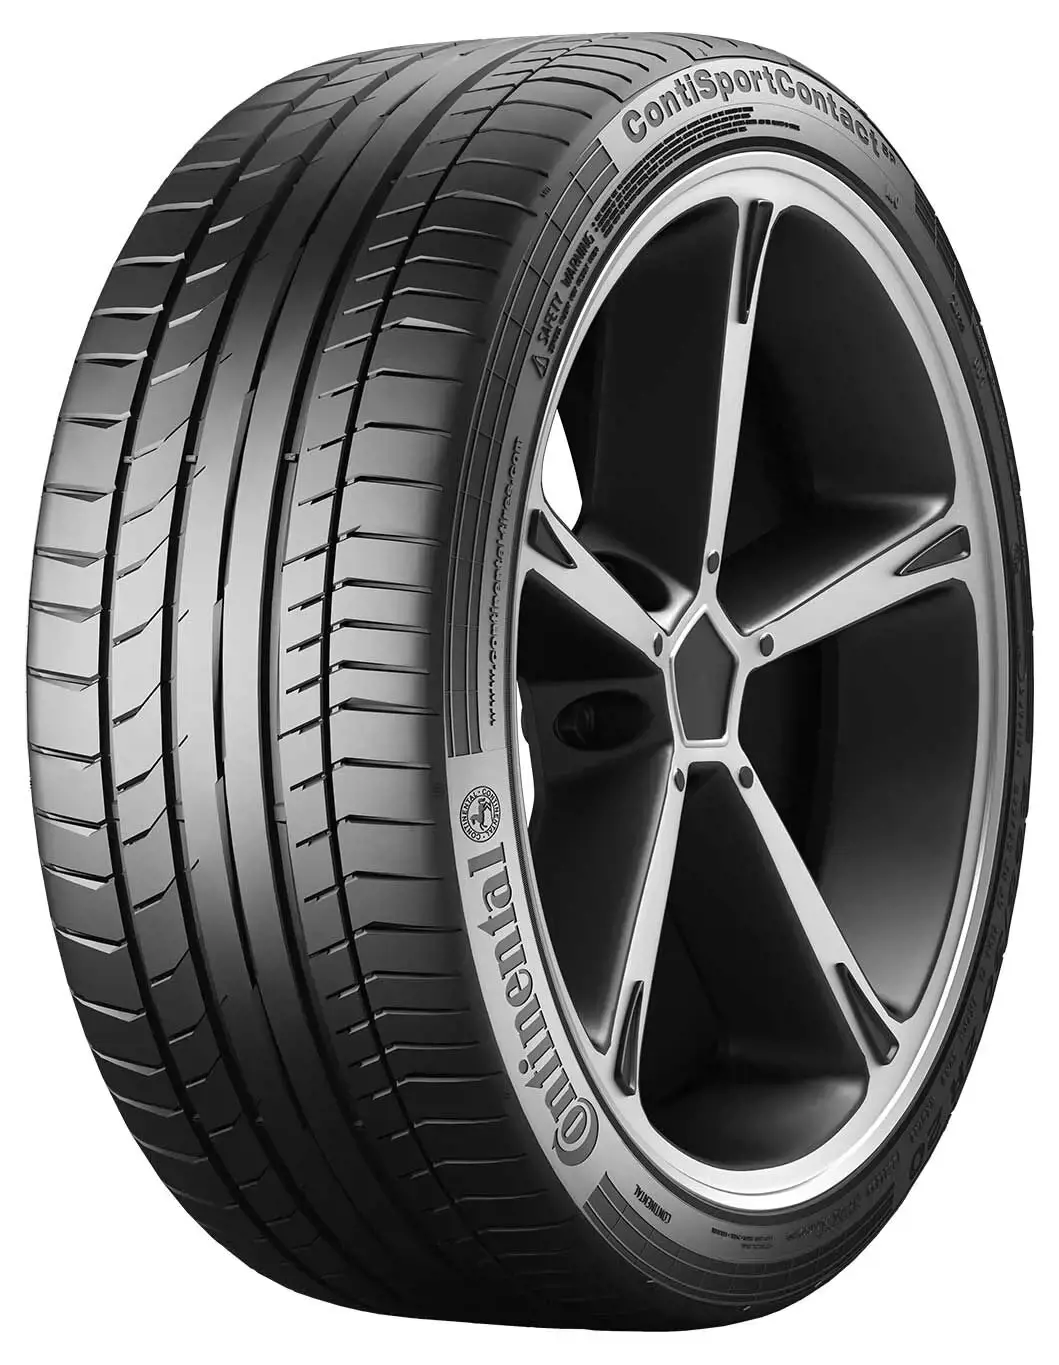 Continental SportContact 5 P 245/40 ZR18 97Y